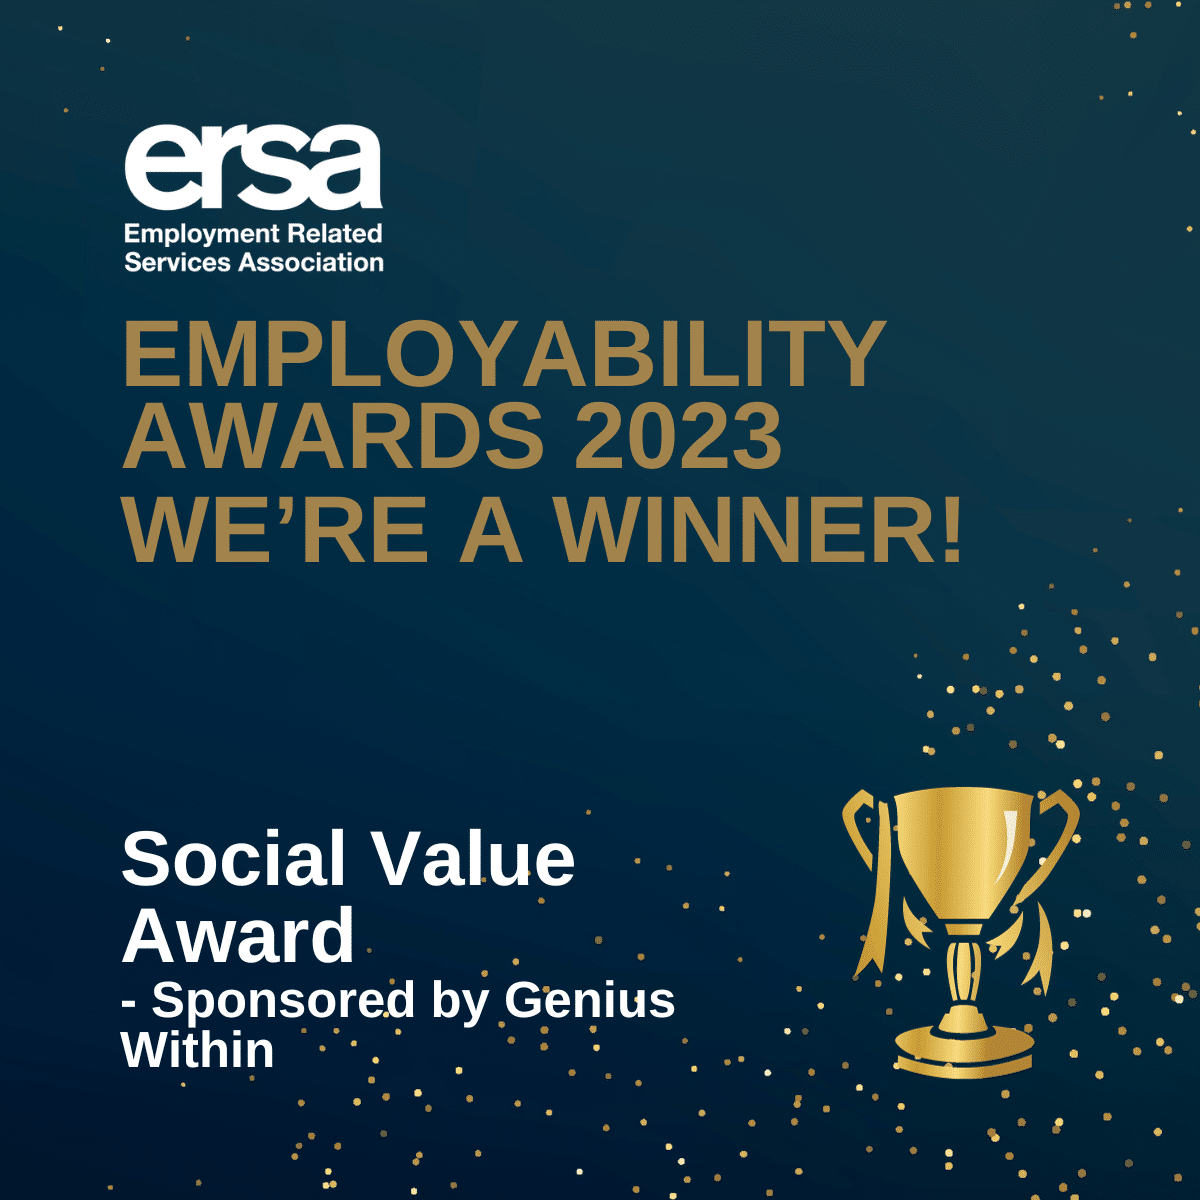 A graphic featuring the words: "ERSA Employability Awards 2023. We're a Winner", plus the category title: Social Value Award.